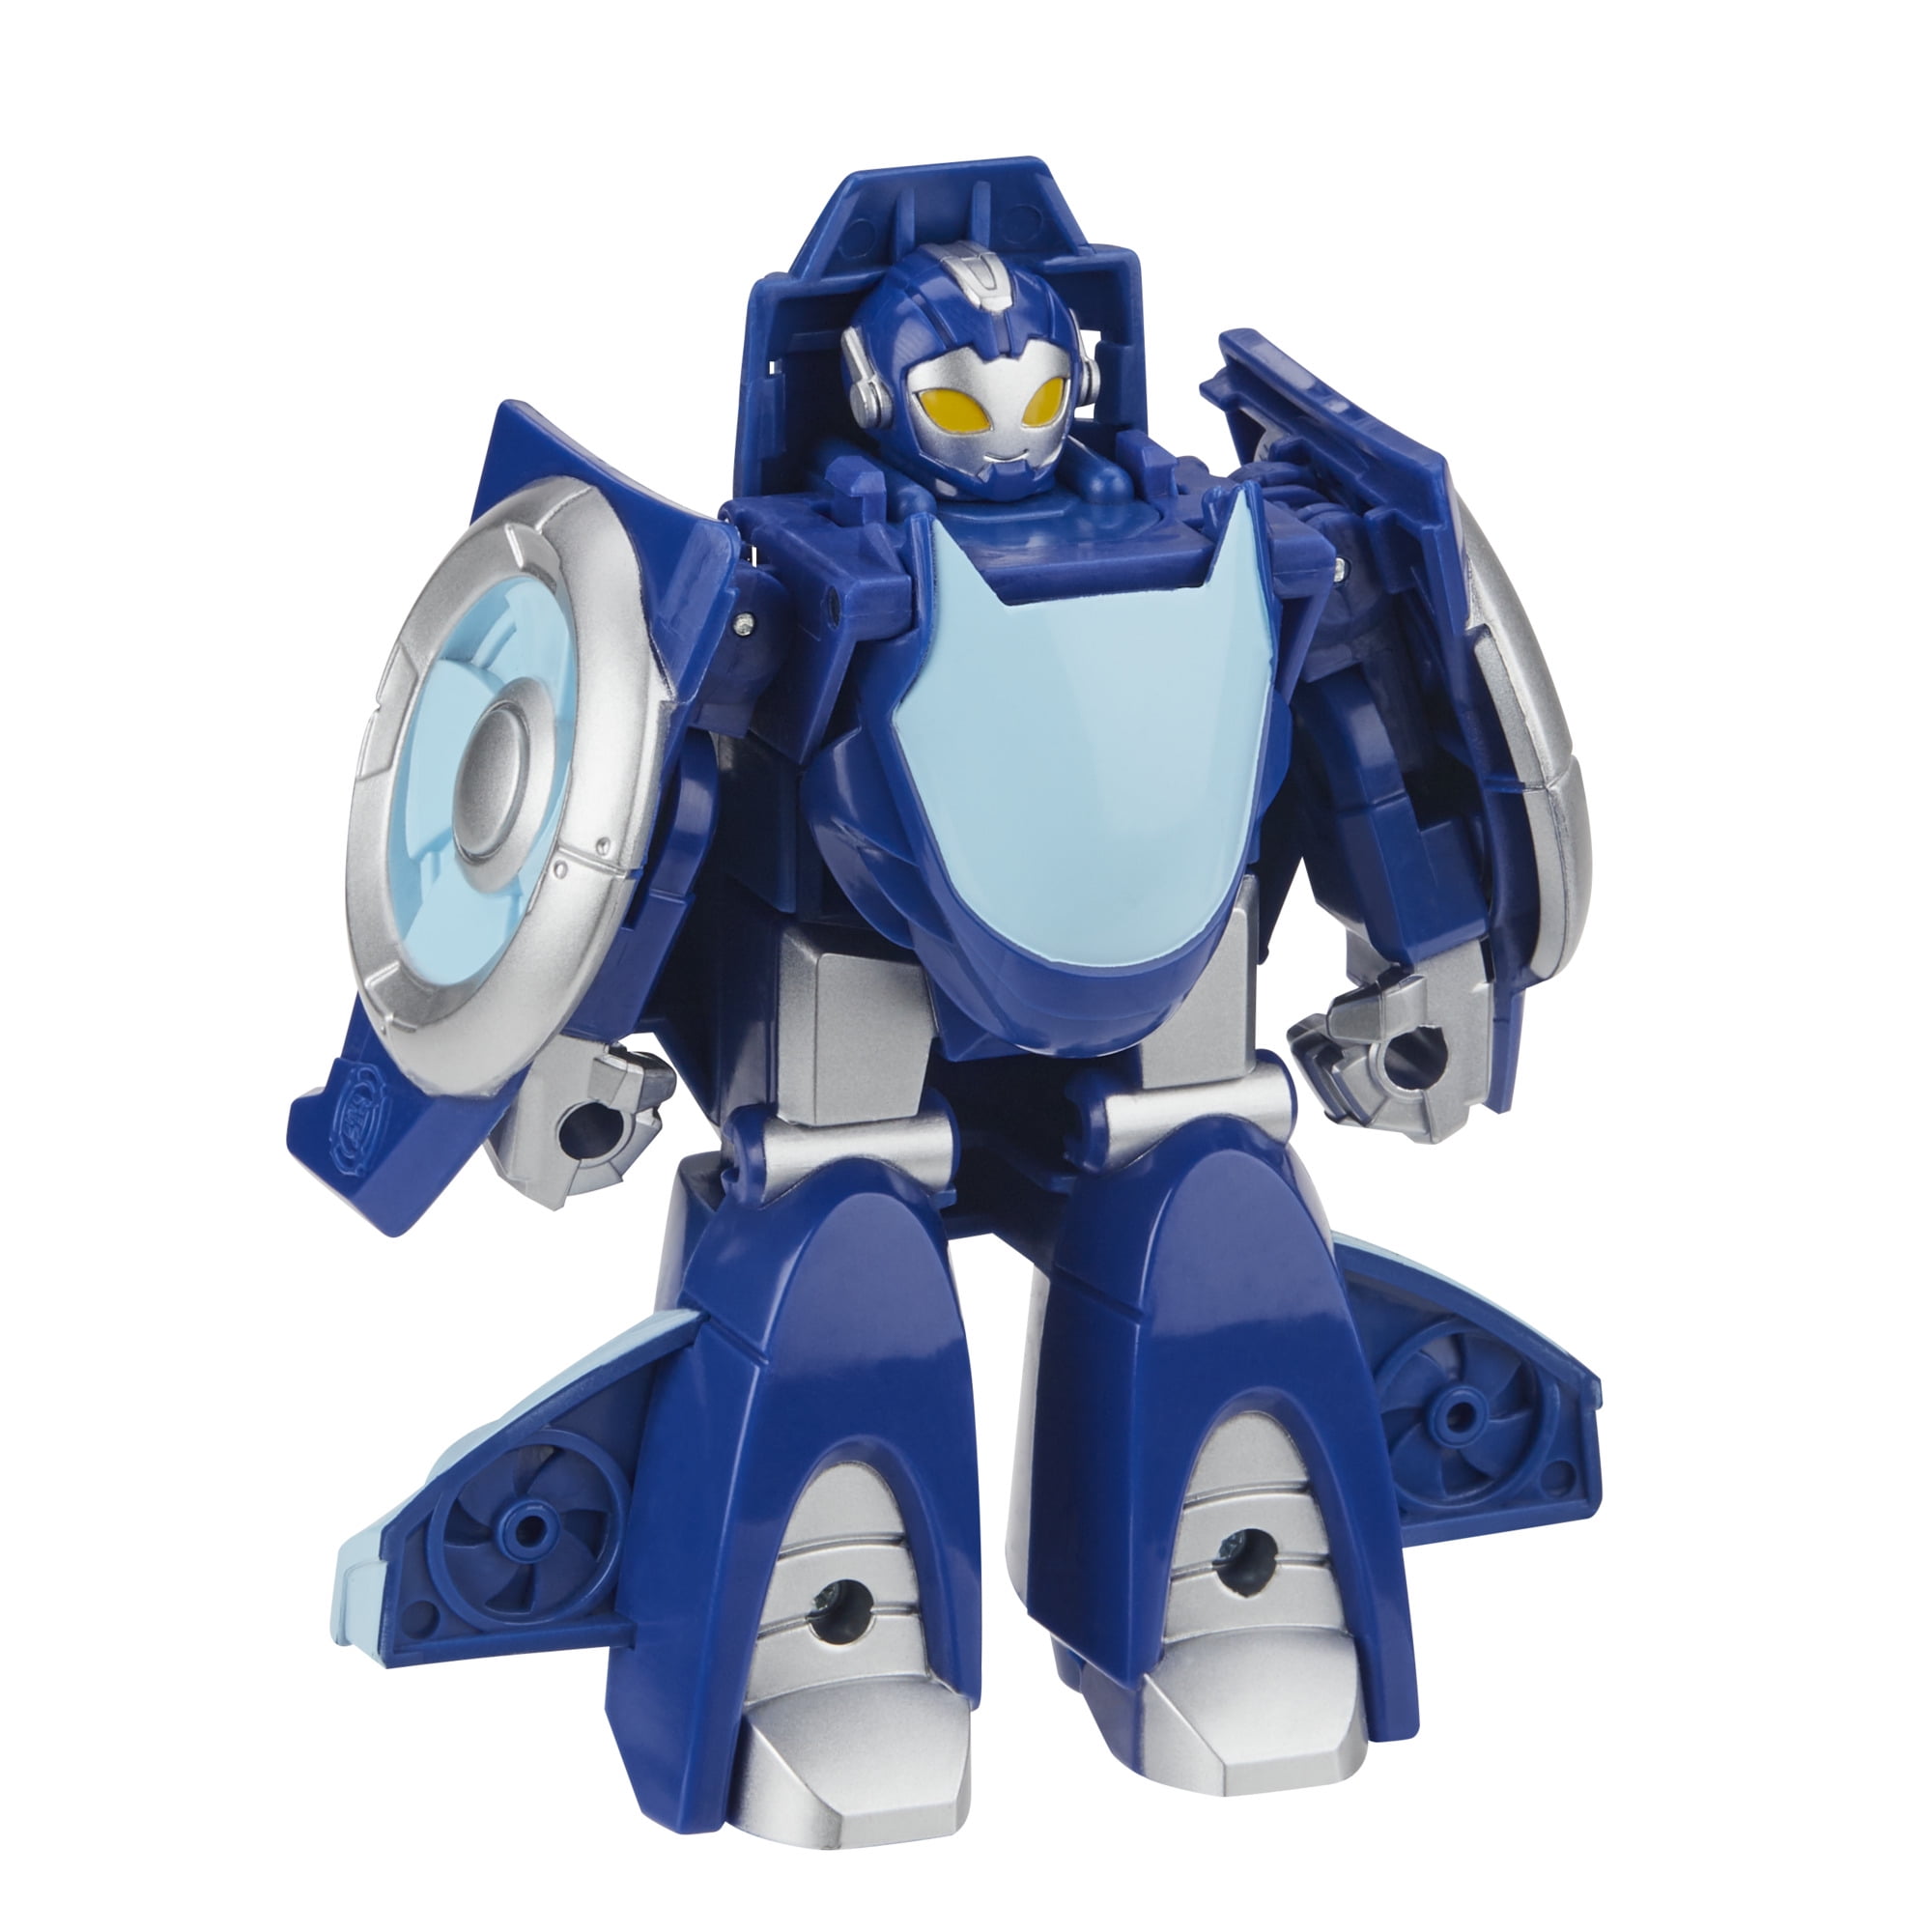 Transformers Rescue Bots Academy 2 In 1 Robot Action Figure Toy Bots 